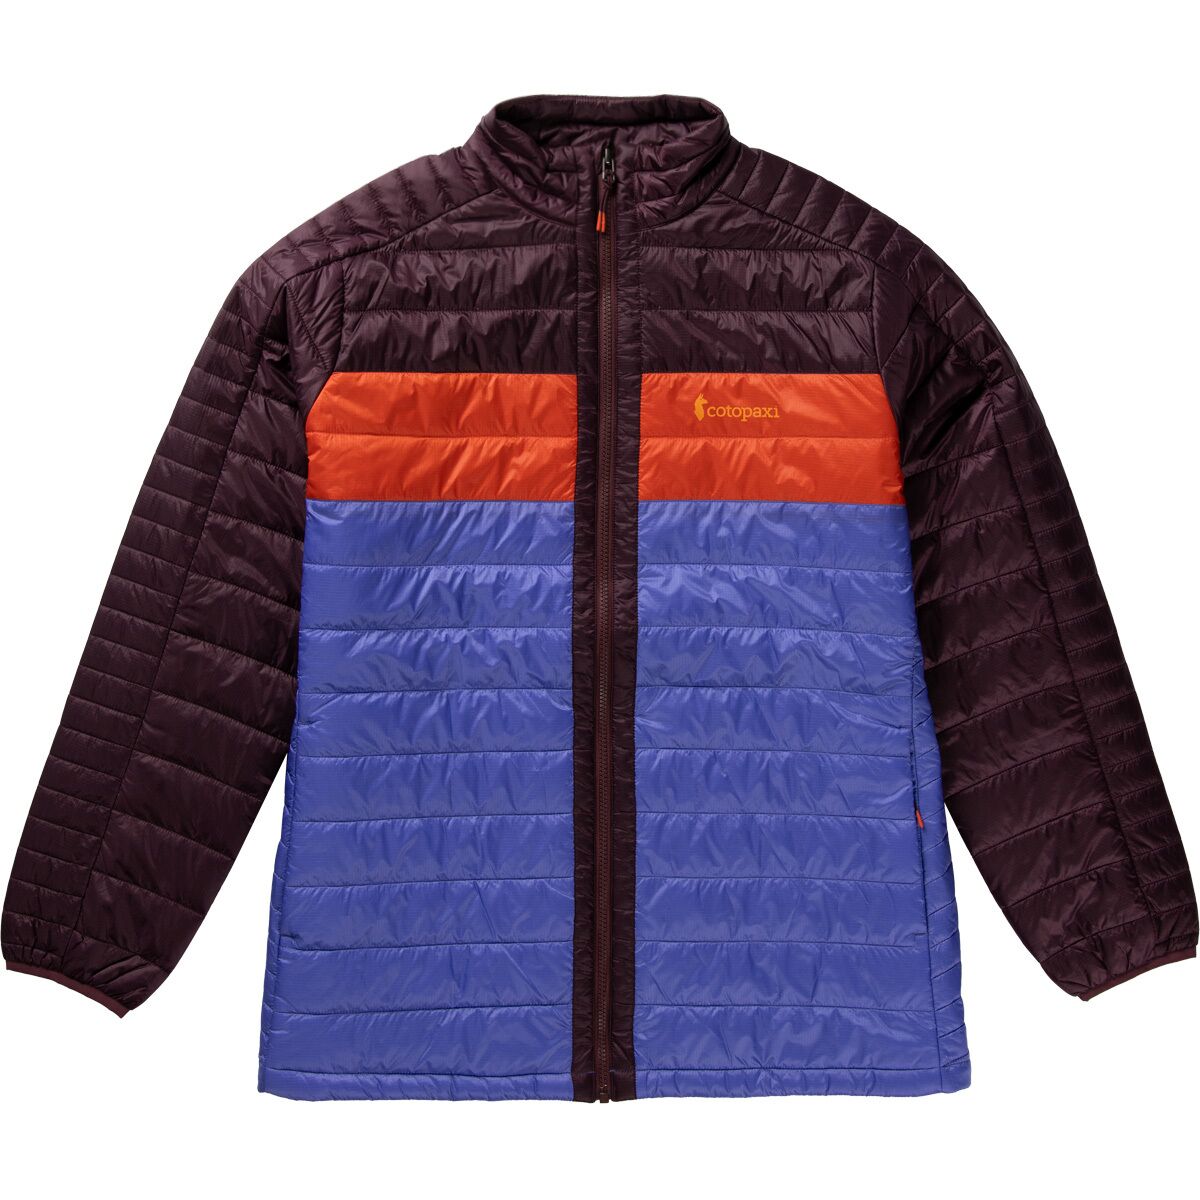 Cotopaxi Capa Insulated Jacket - Plus Size - Women's